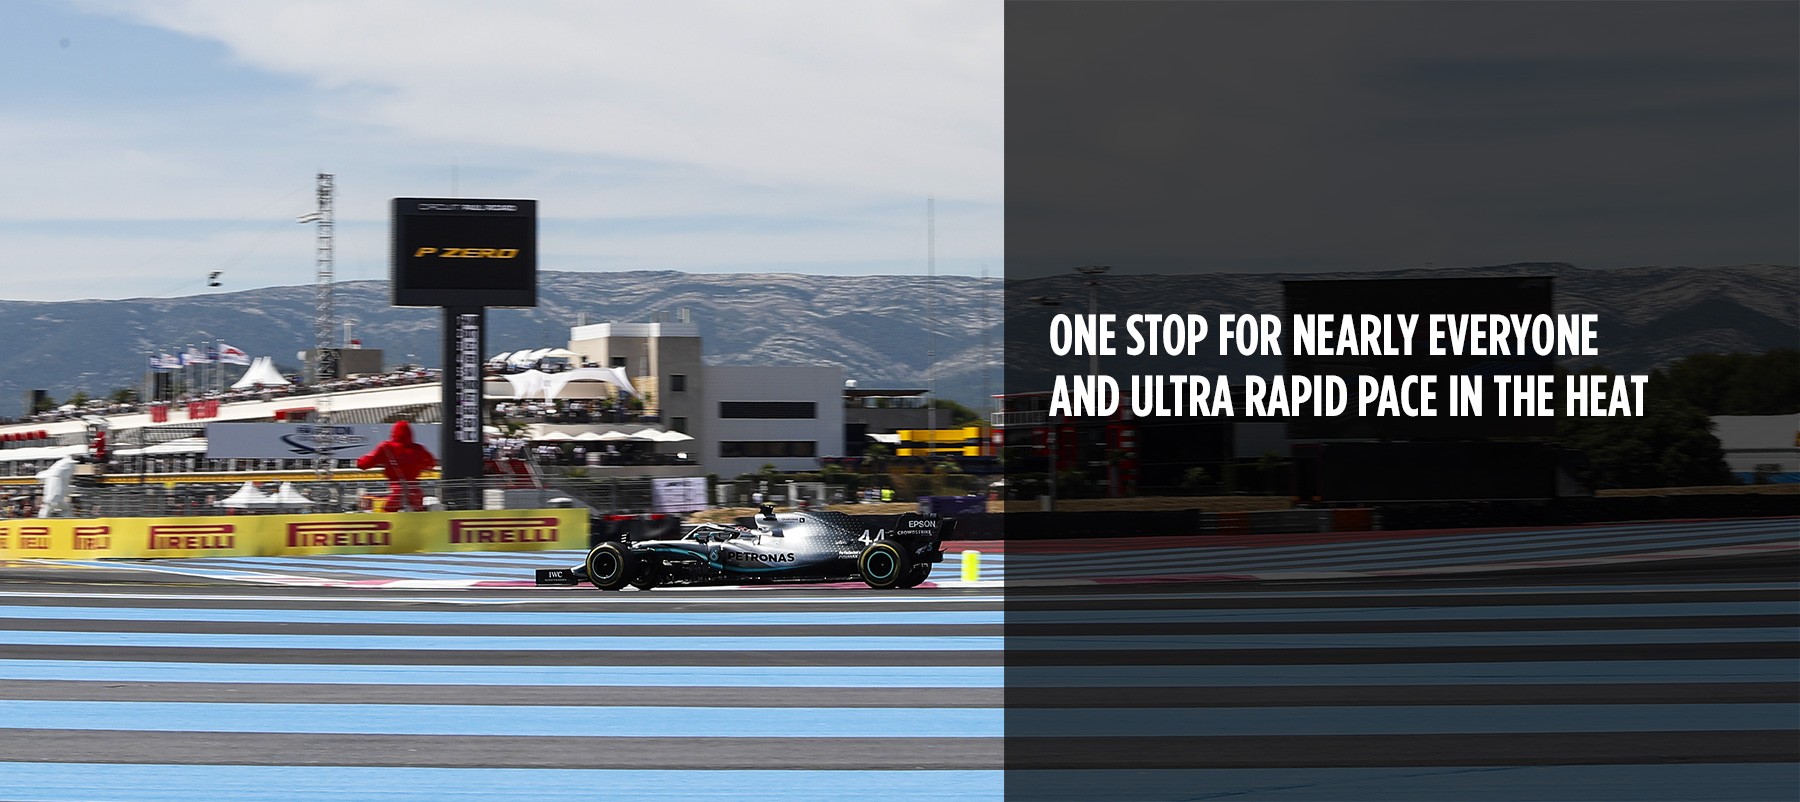 The French Grand Prix, sponsored by Pirelli, was held at a temperature of 54º